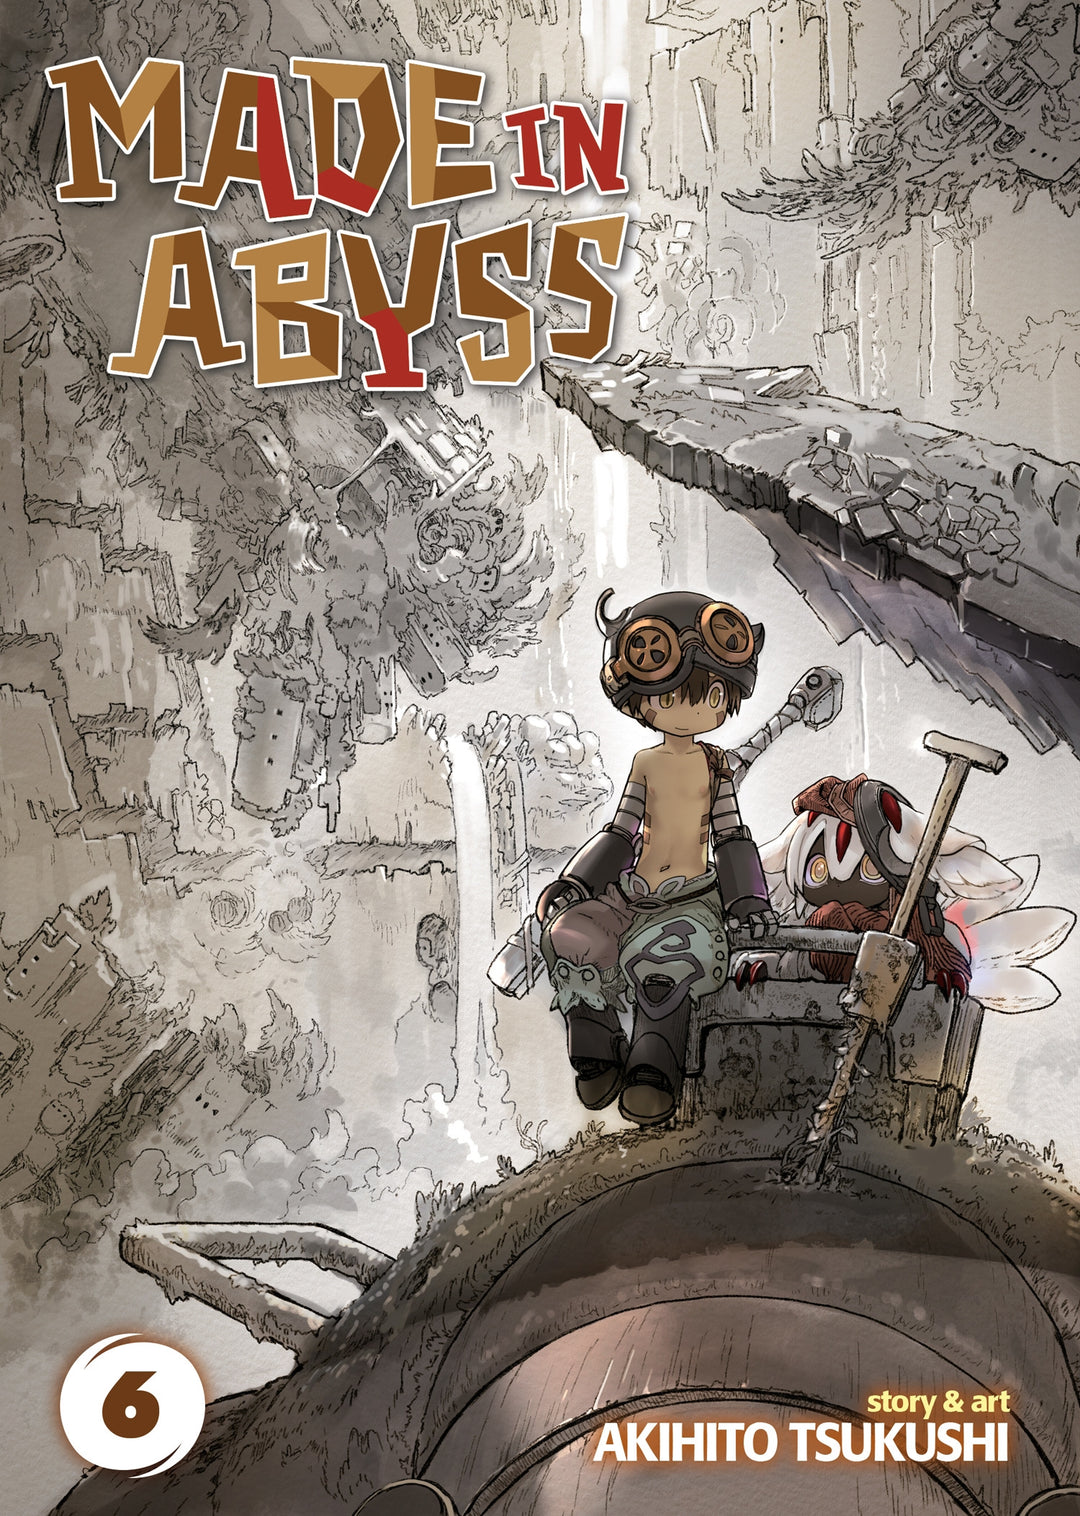 Made in Abyss, Vol. 06